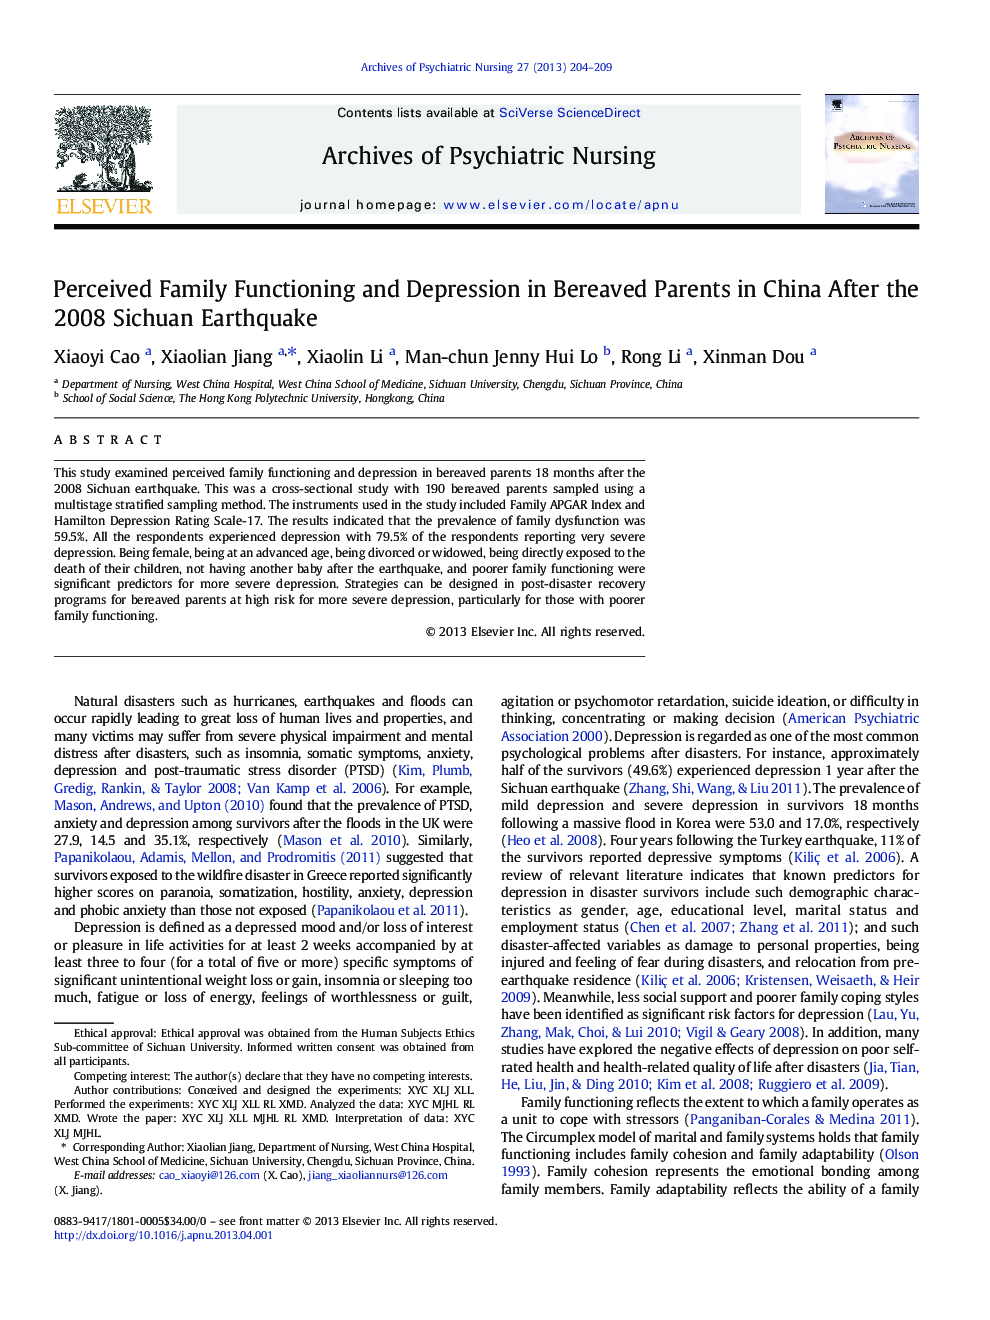 Perceived Family Functioning and Depression in Bereaved Parents in China After the 2008 Sichuan Earthquake